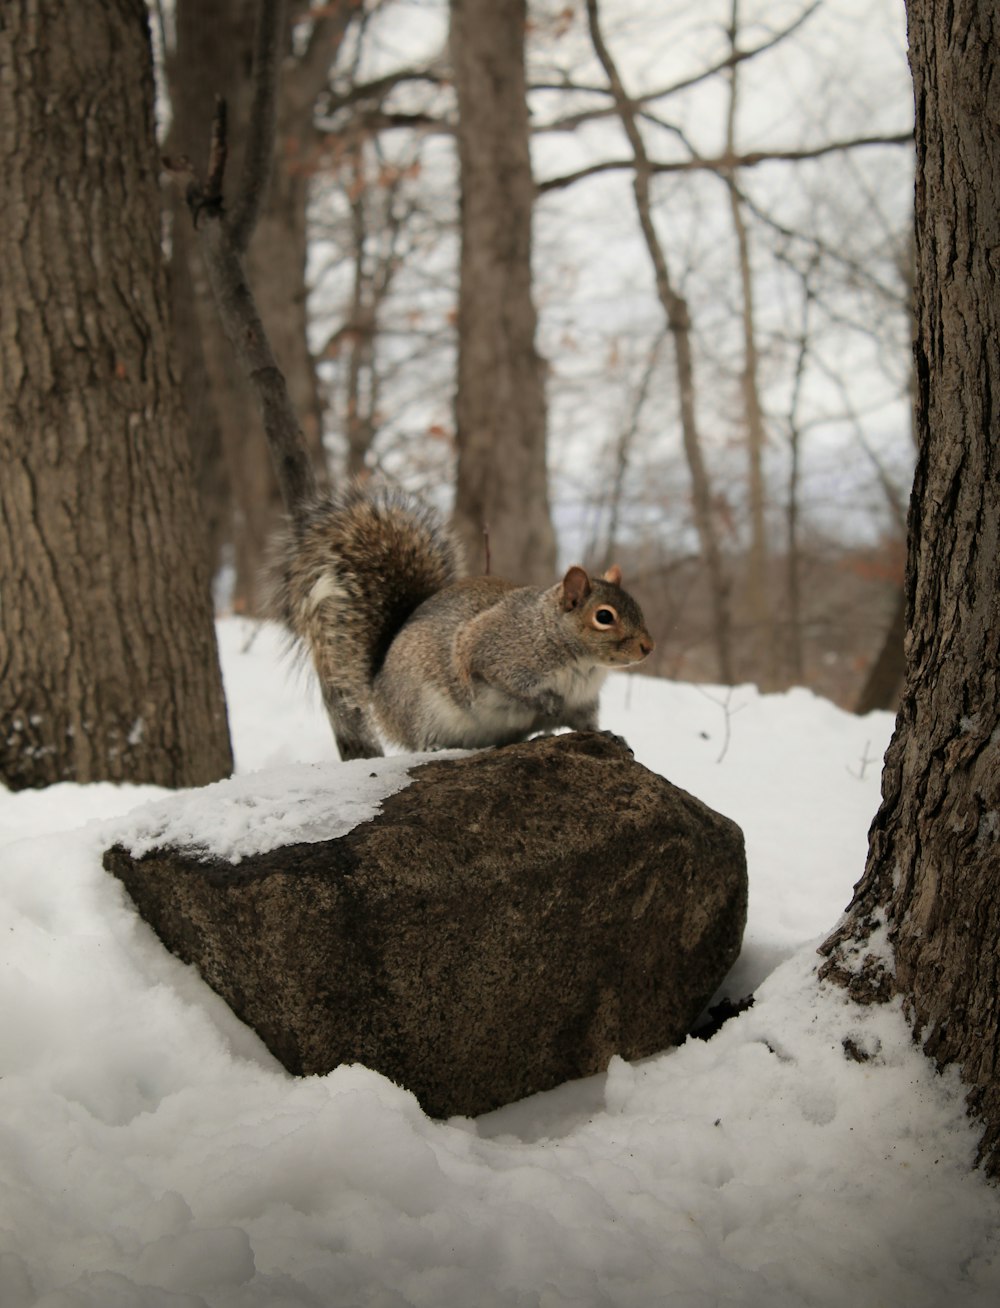 a squirrel is standing on a rock in the snow